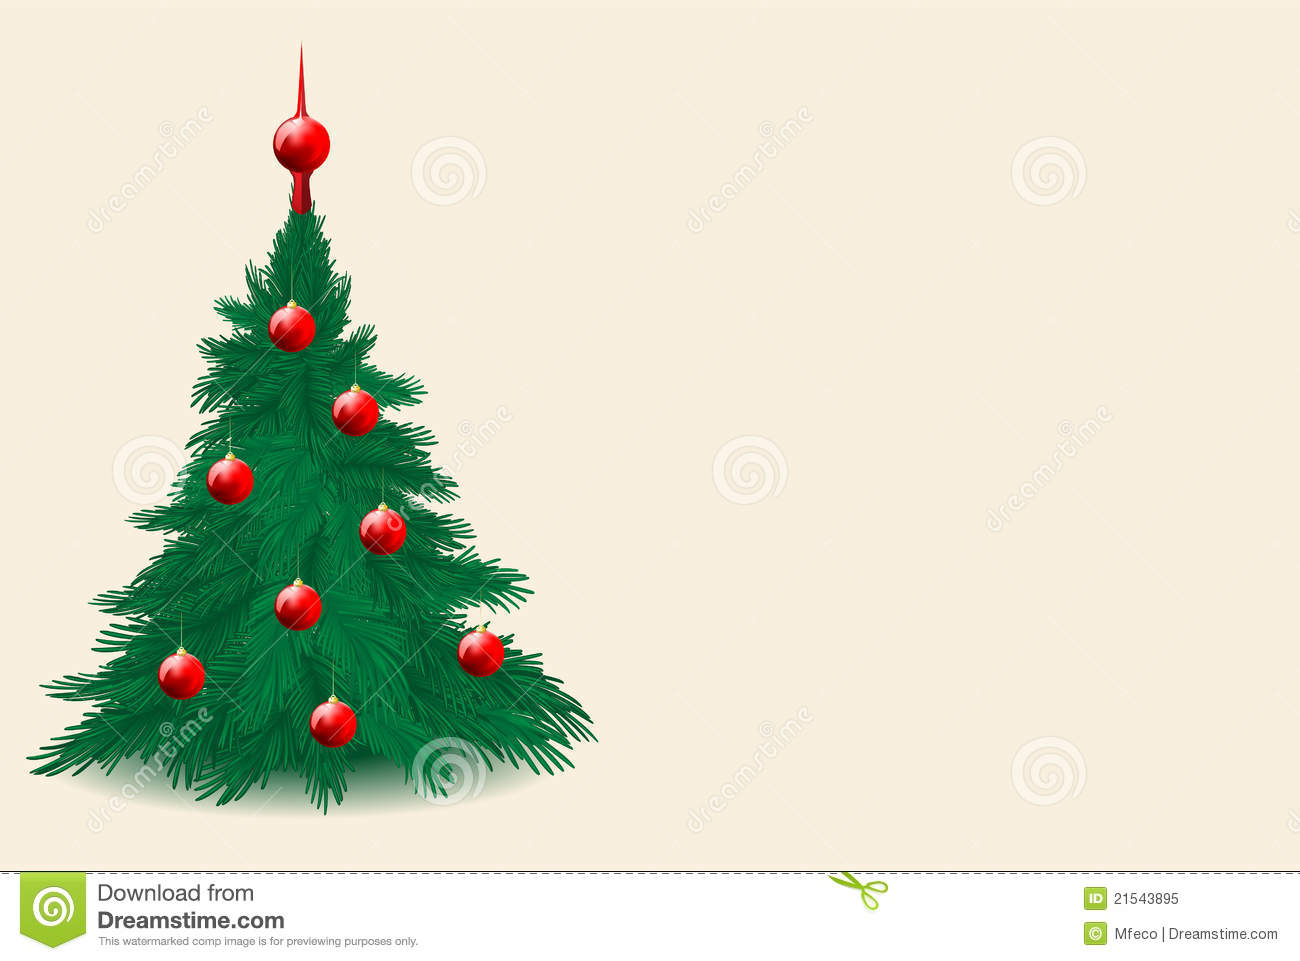 Christmas Themed Background Submited Image